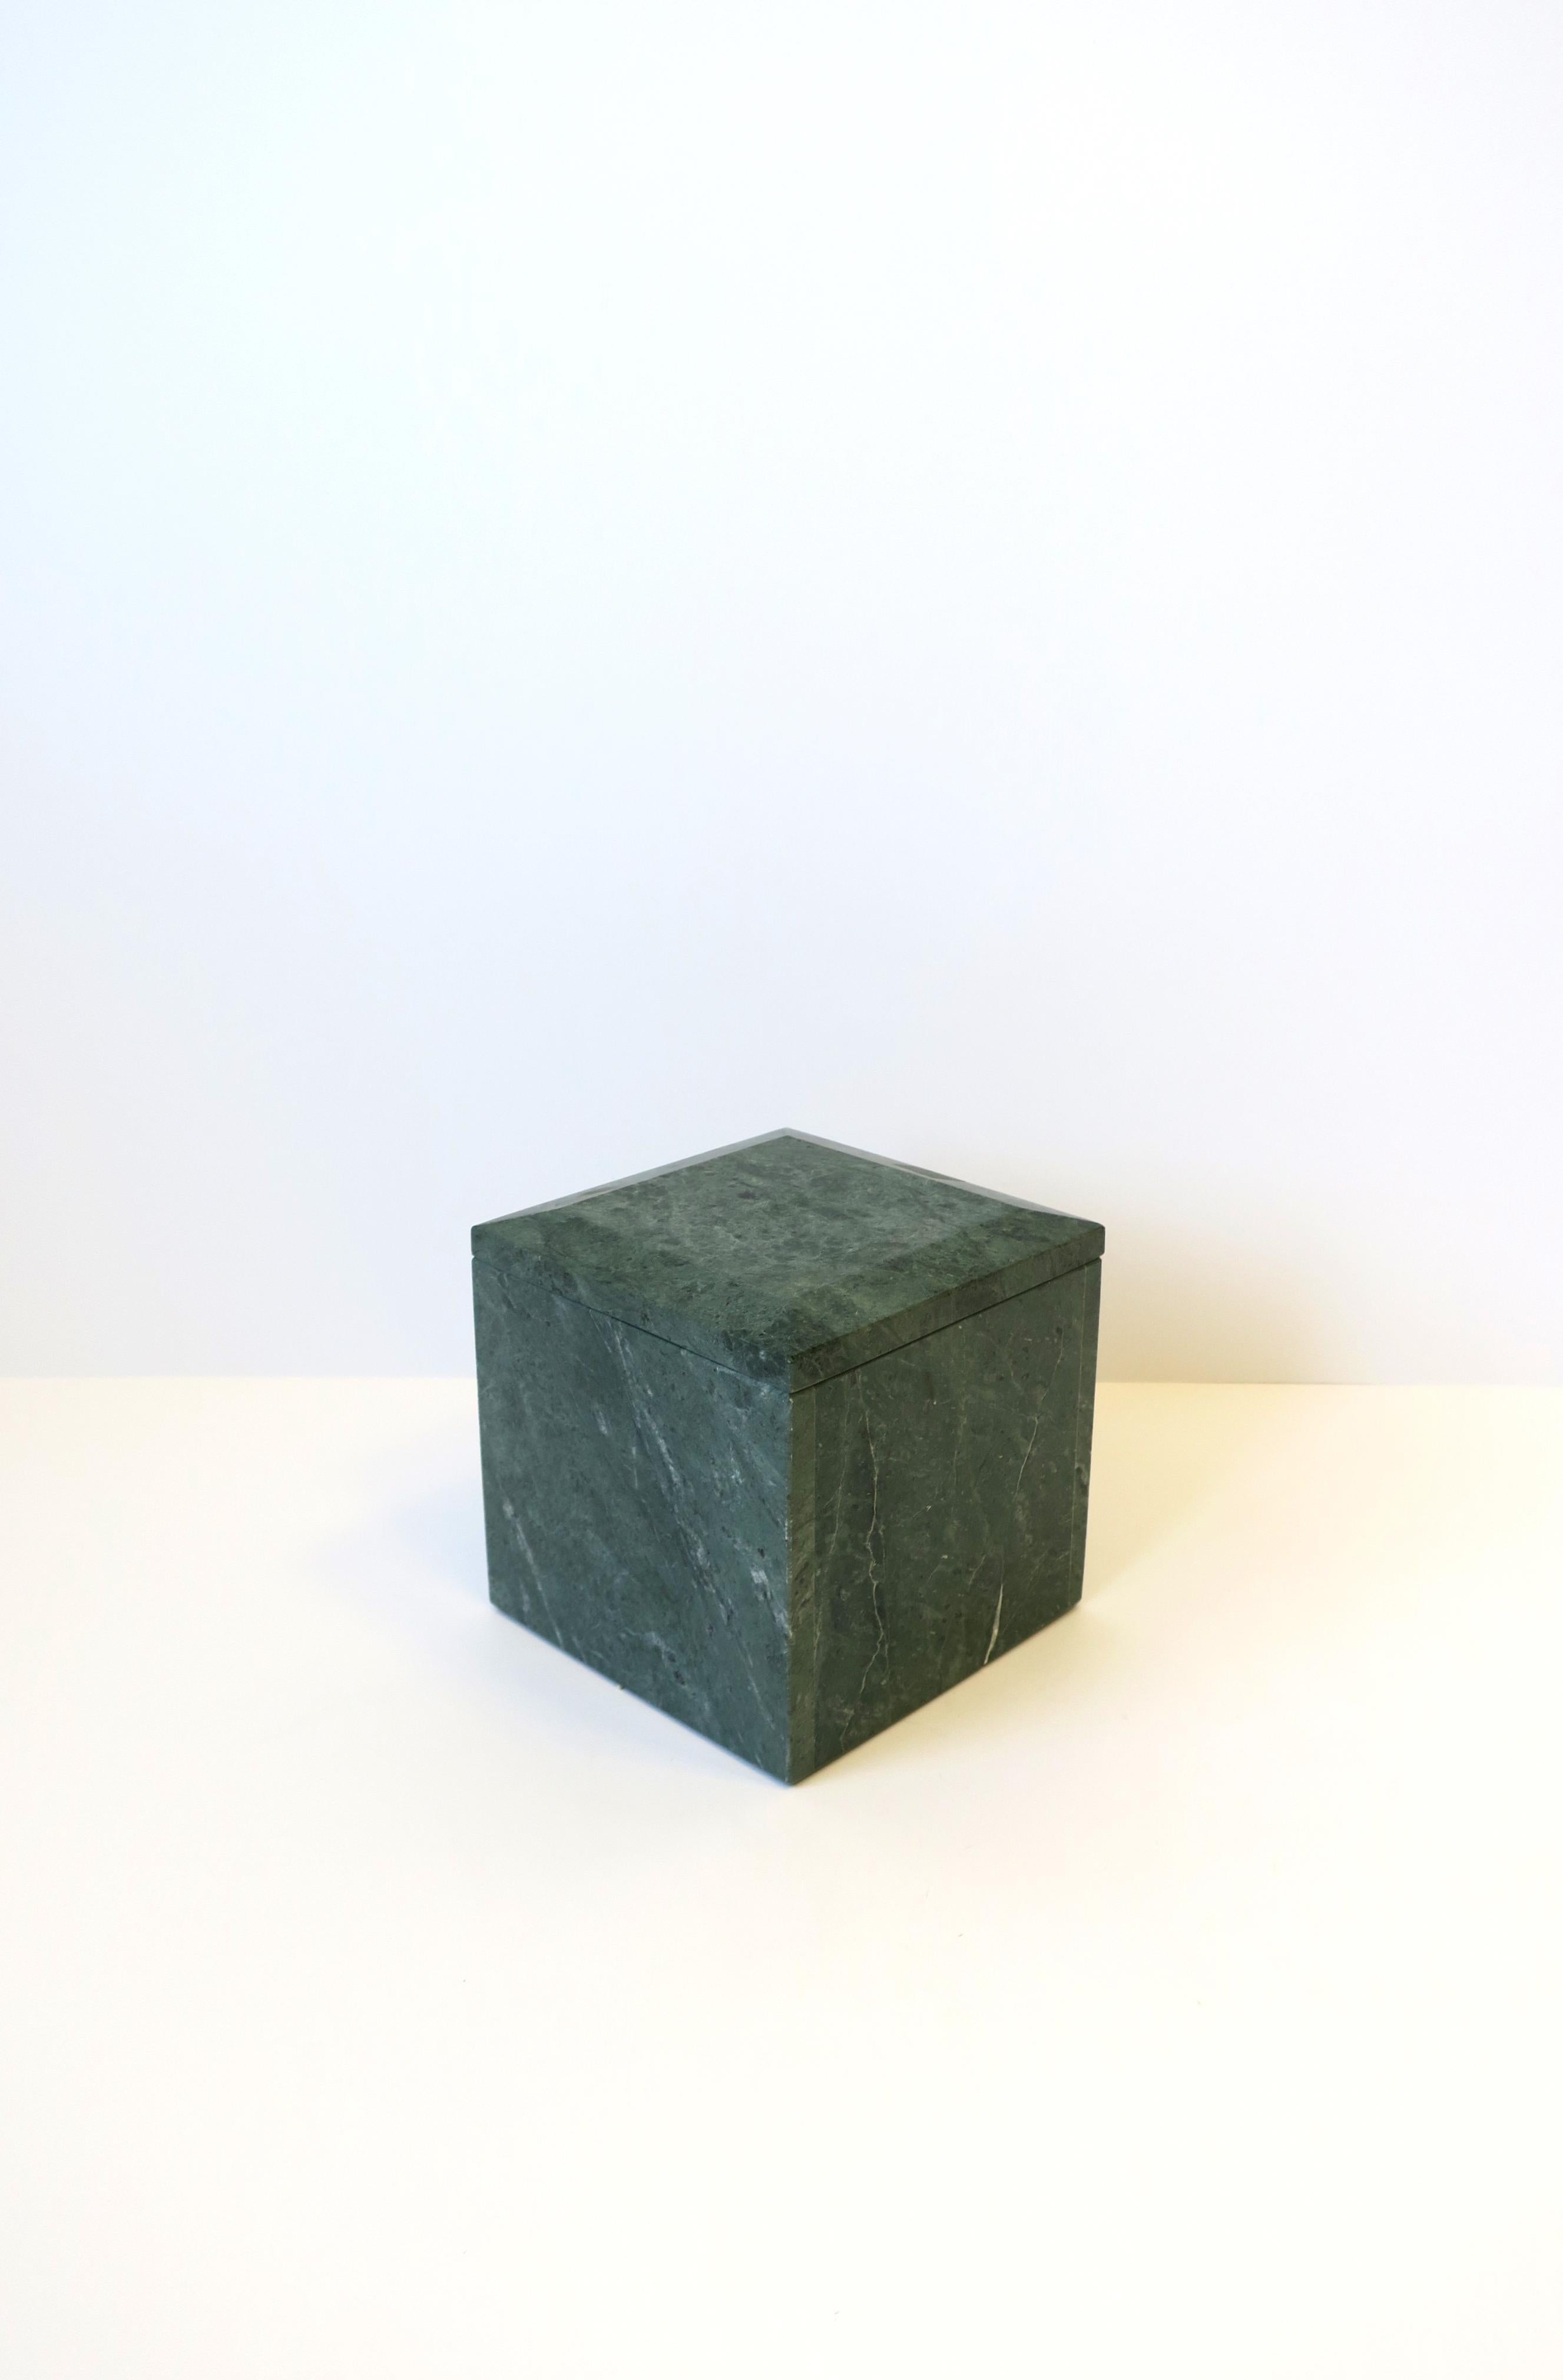 A beautiful and substantial Italian Modern Postmodern square green Verde marble box, circa 1970s, Italy. Marble is predominantly medium and dark green hues with white veining. Top has a beveled edge. Piece can also be used as a bookend as